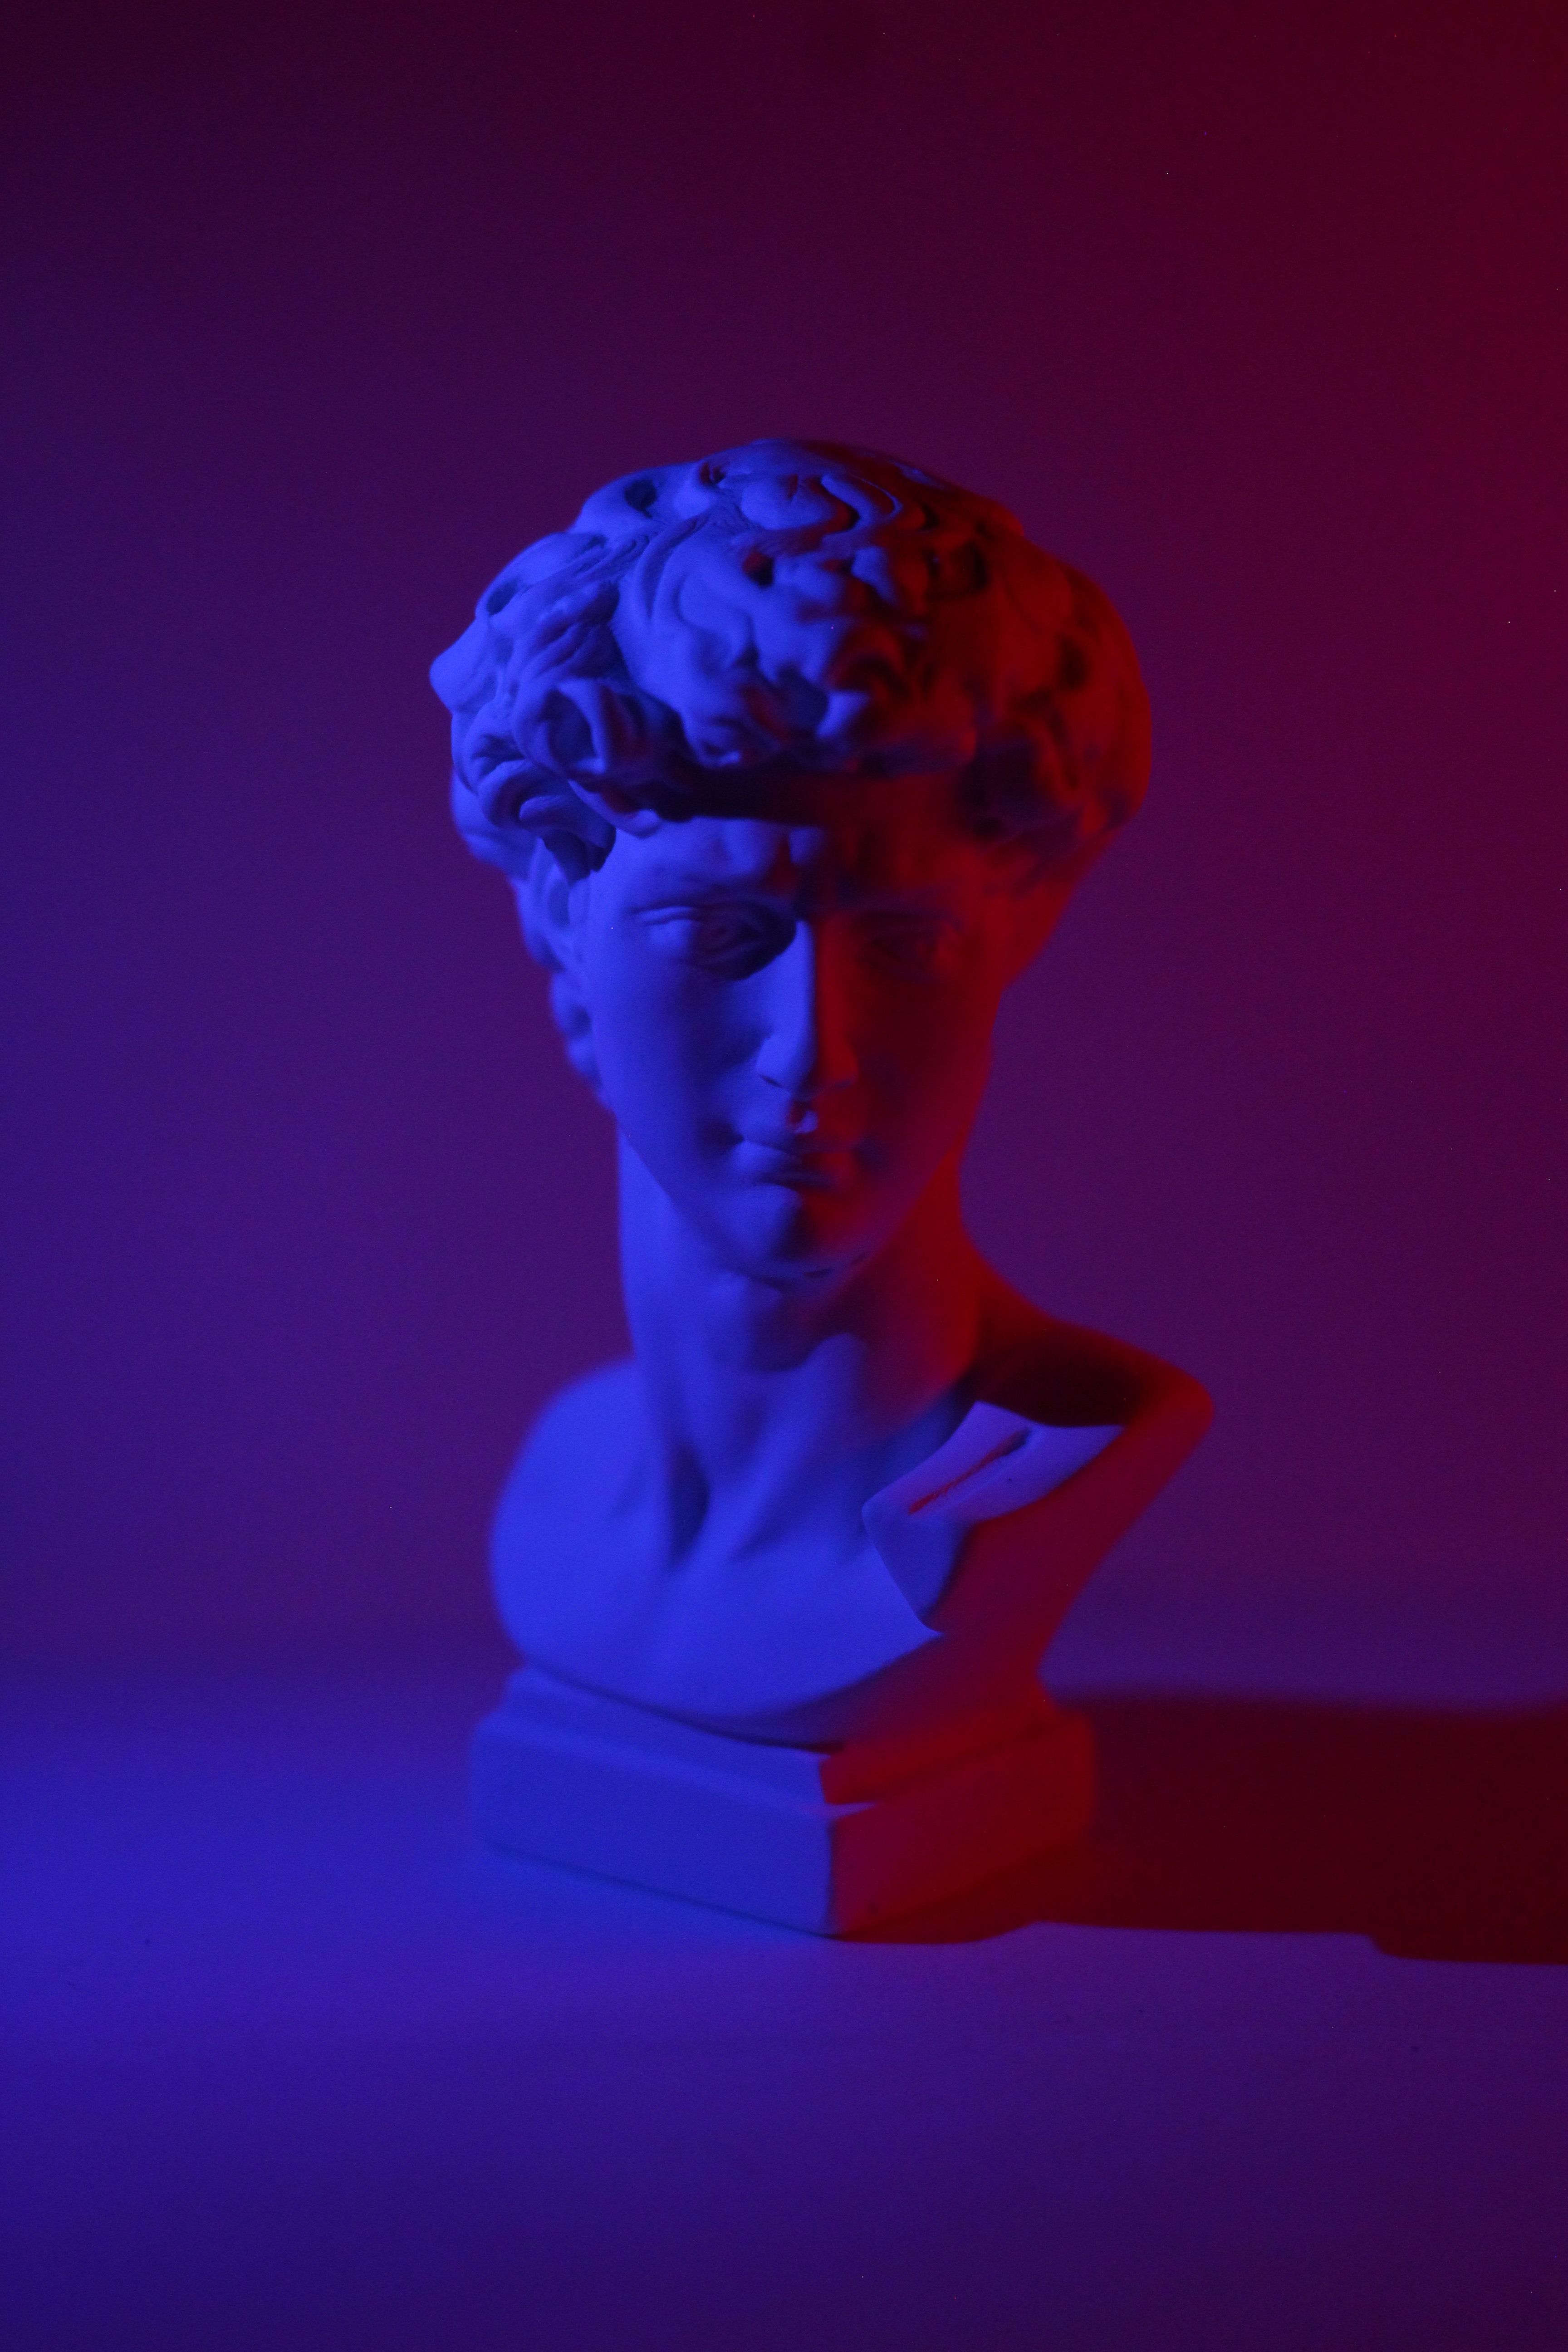 A sculpture of David's head, with a blue and red light shining on it. - Greek statue, statue